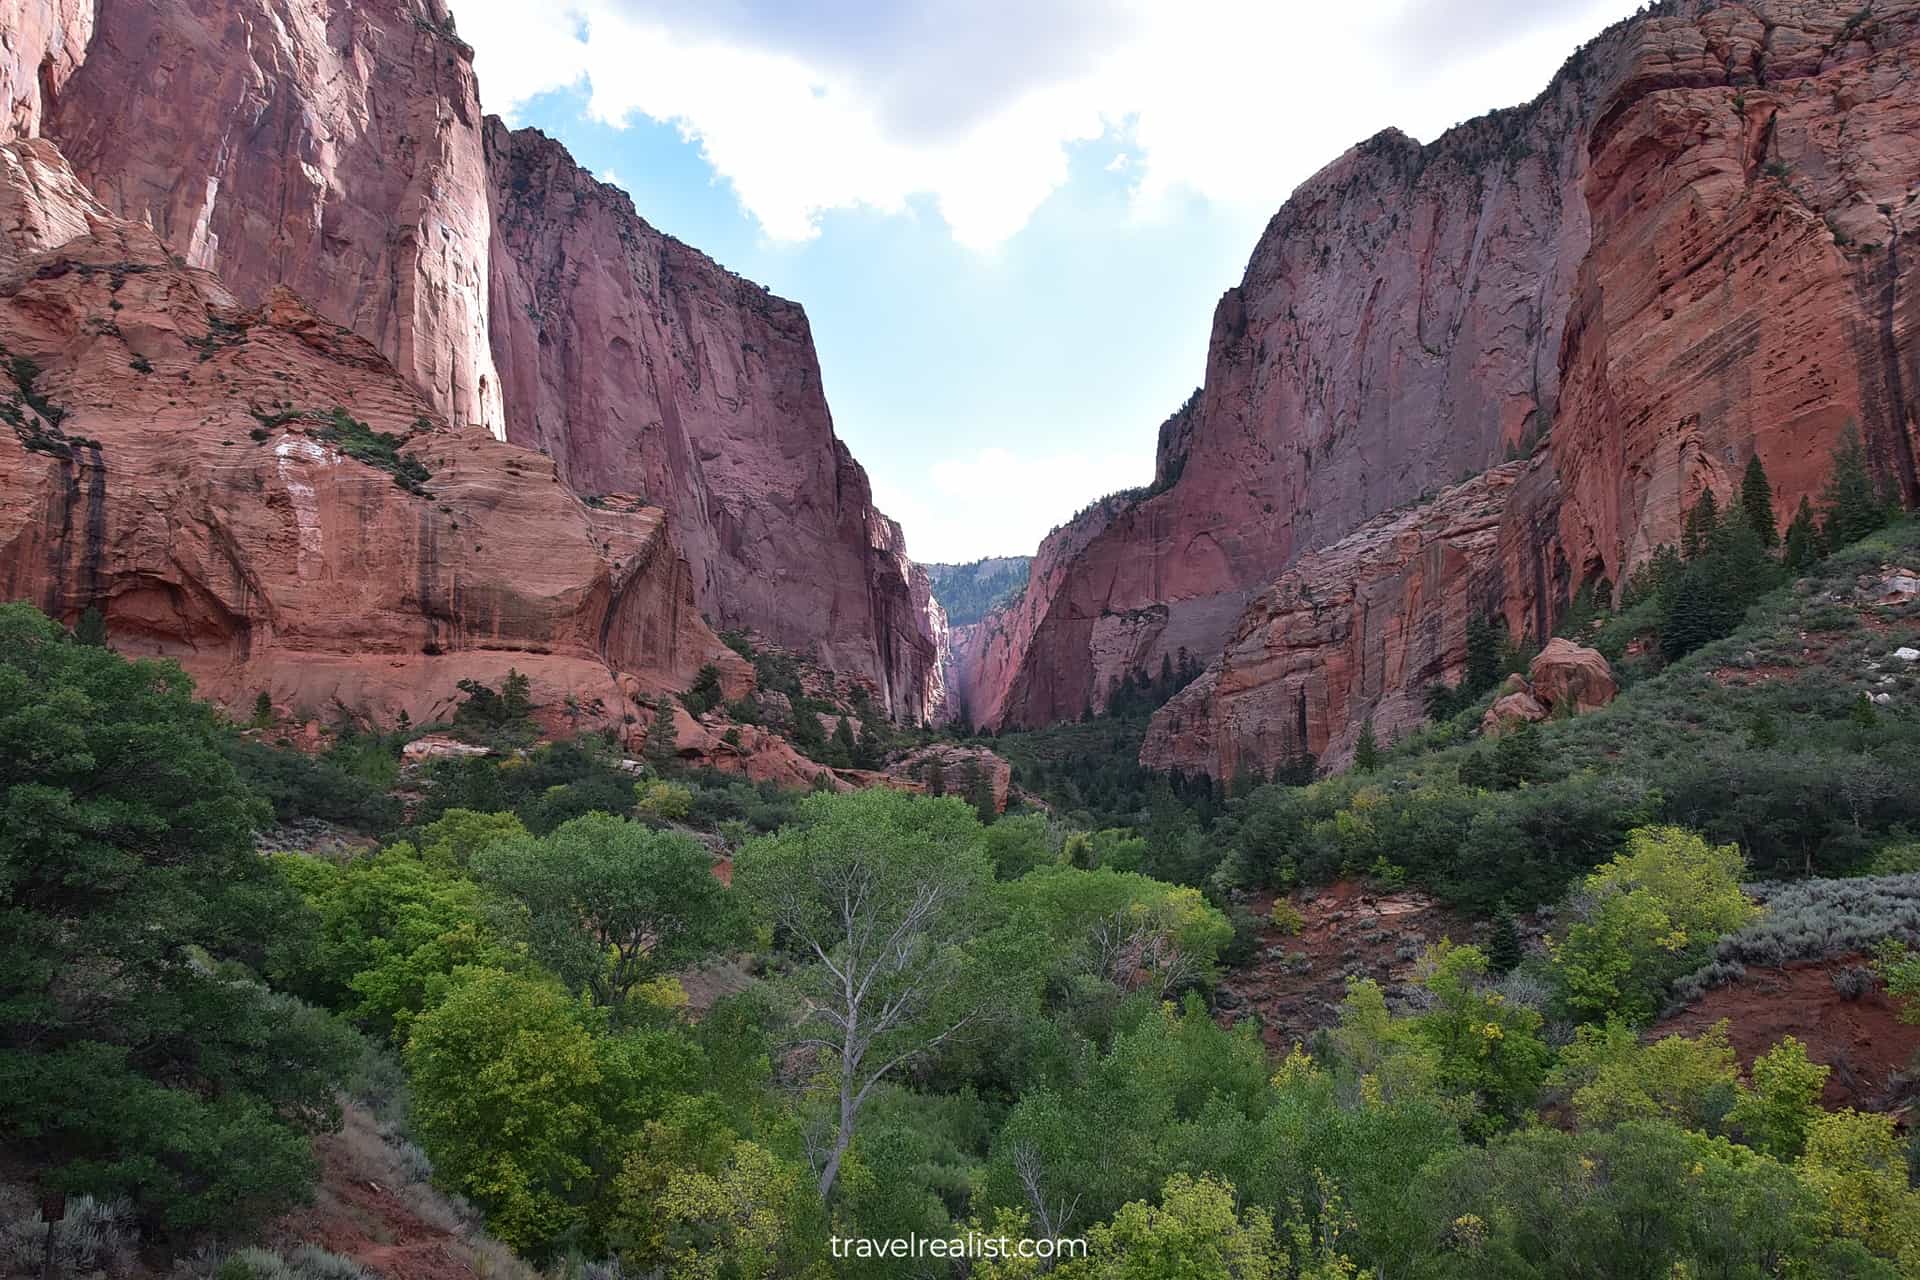 Views of Paria Point and Taylor Creek South Fork in Zion National Park, Utah, US